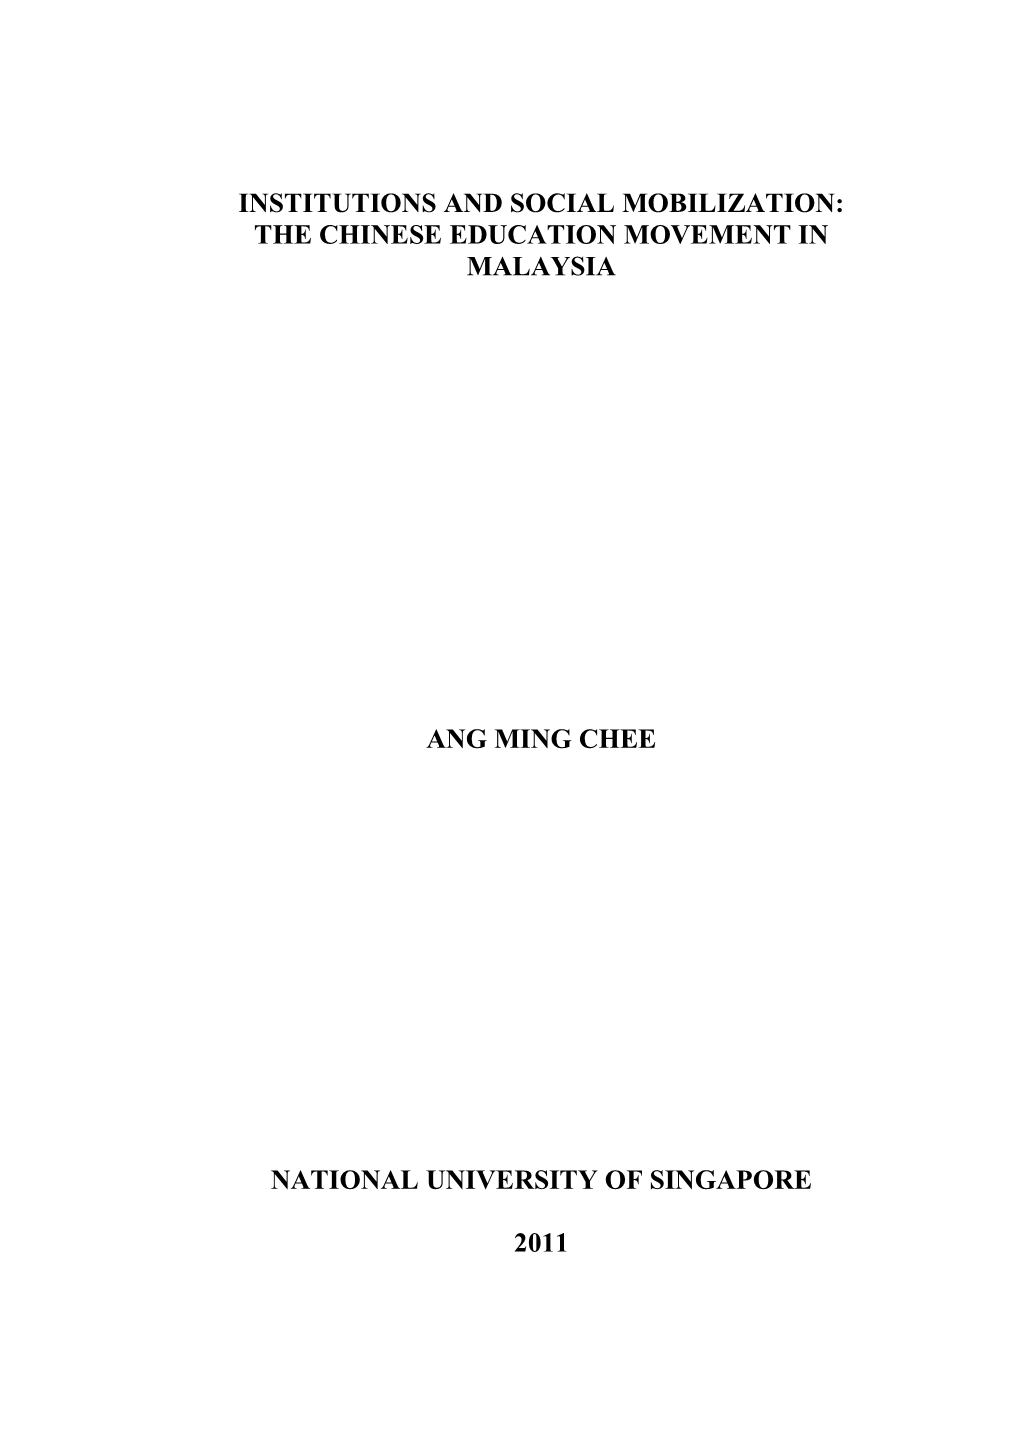 The Chinese Education Movement in Malaysia